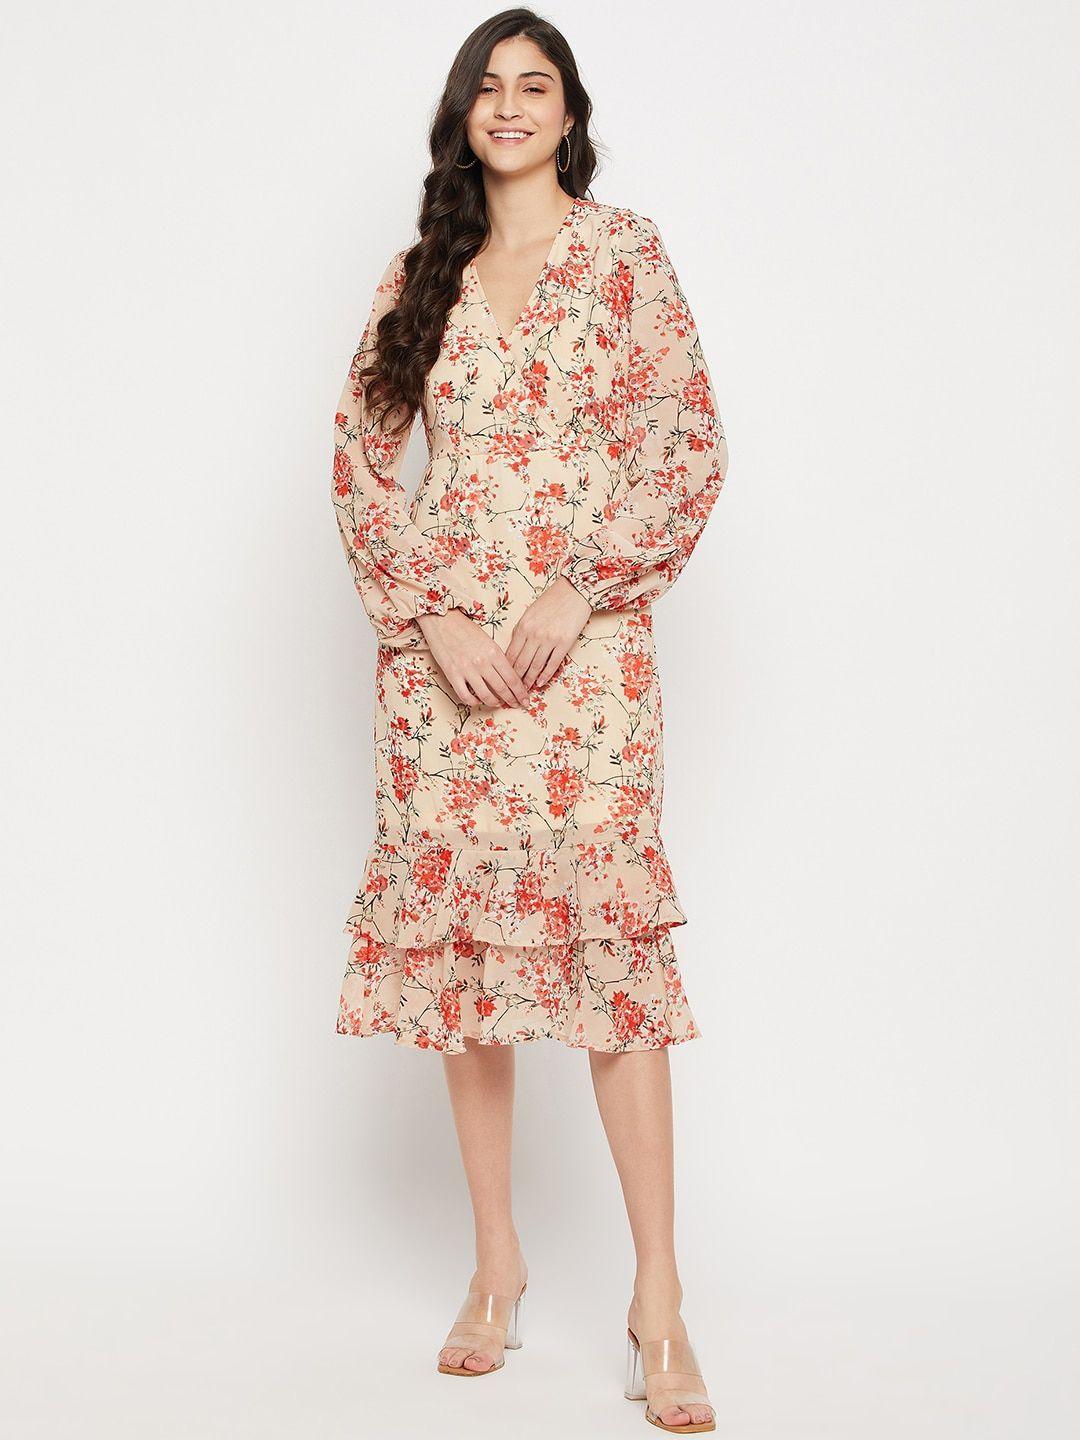 style-blush-floral-printed-puff-sleeve-ruffled-fit-and-flare-midi-dress